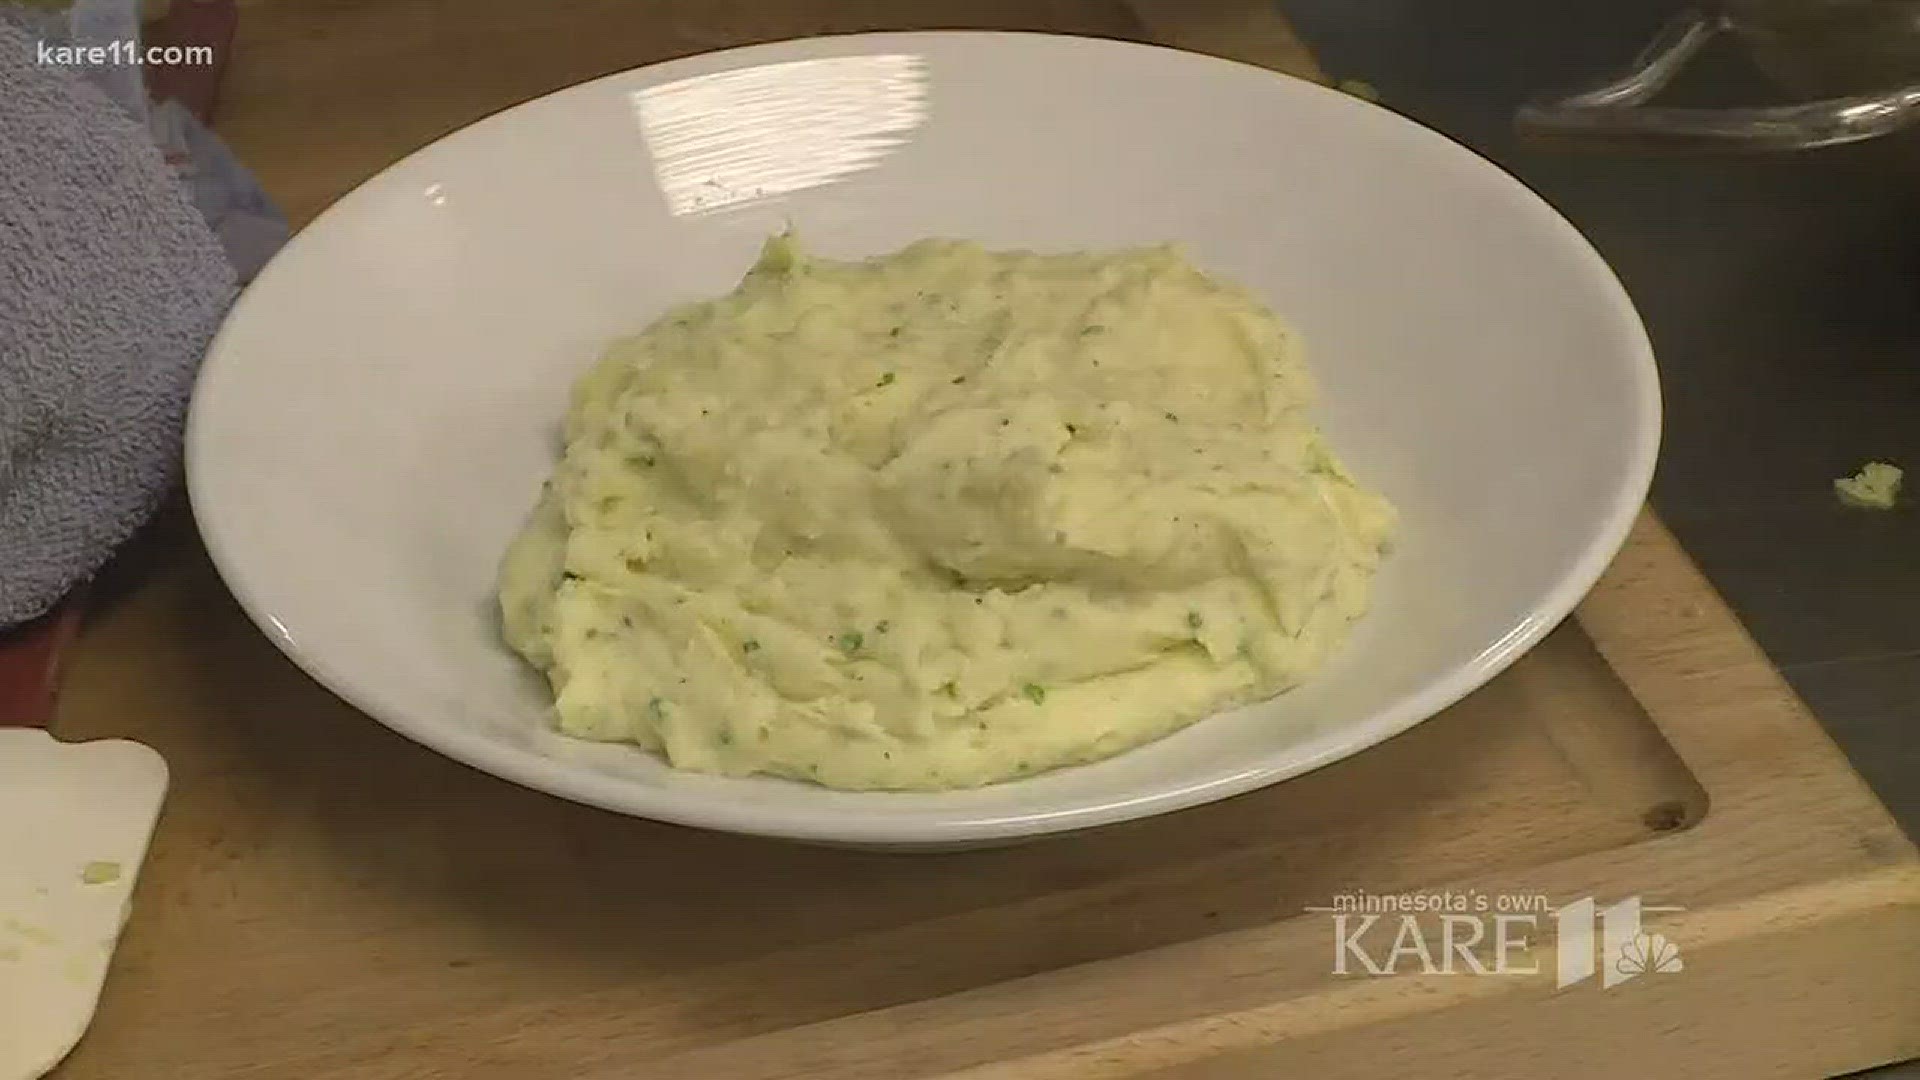 A staple on the Thanksgiving table, mashed potatoes can be ordinary, requiring a heavy helping of gravy, but Chef Paul Lynch from Urbana Craeft Kitchen shares his secret to the perfect mashed potatoes. http://kare11.tv/2zfN6s2